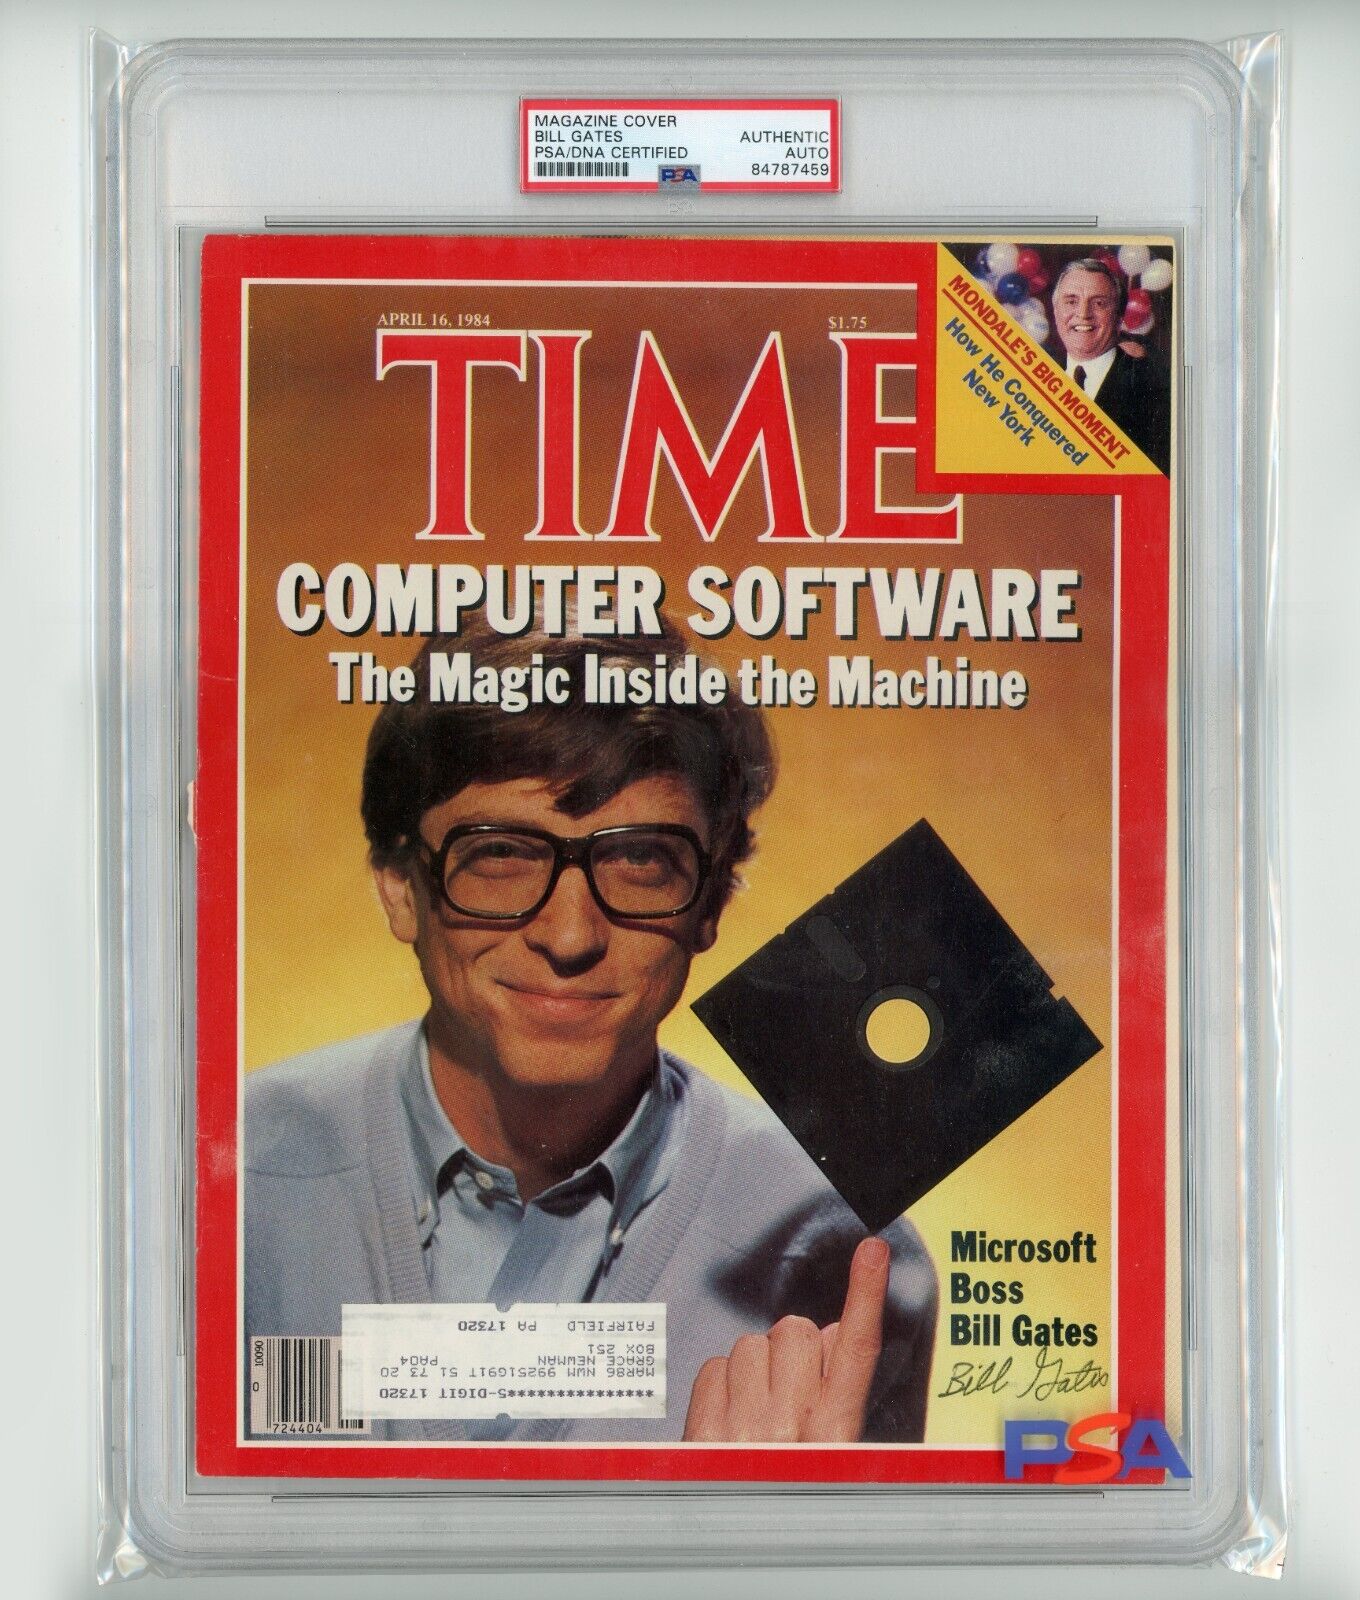 Bill Gates (Microsoft) ~ Signed Autographed 1984 Time Magazine Cover ~ PSA DNA